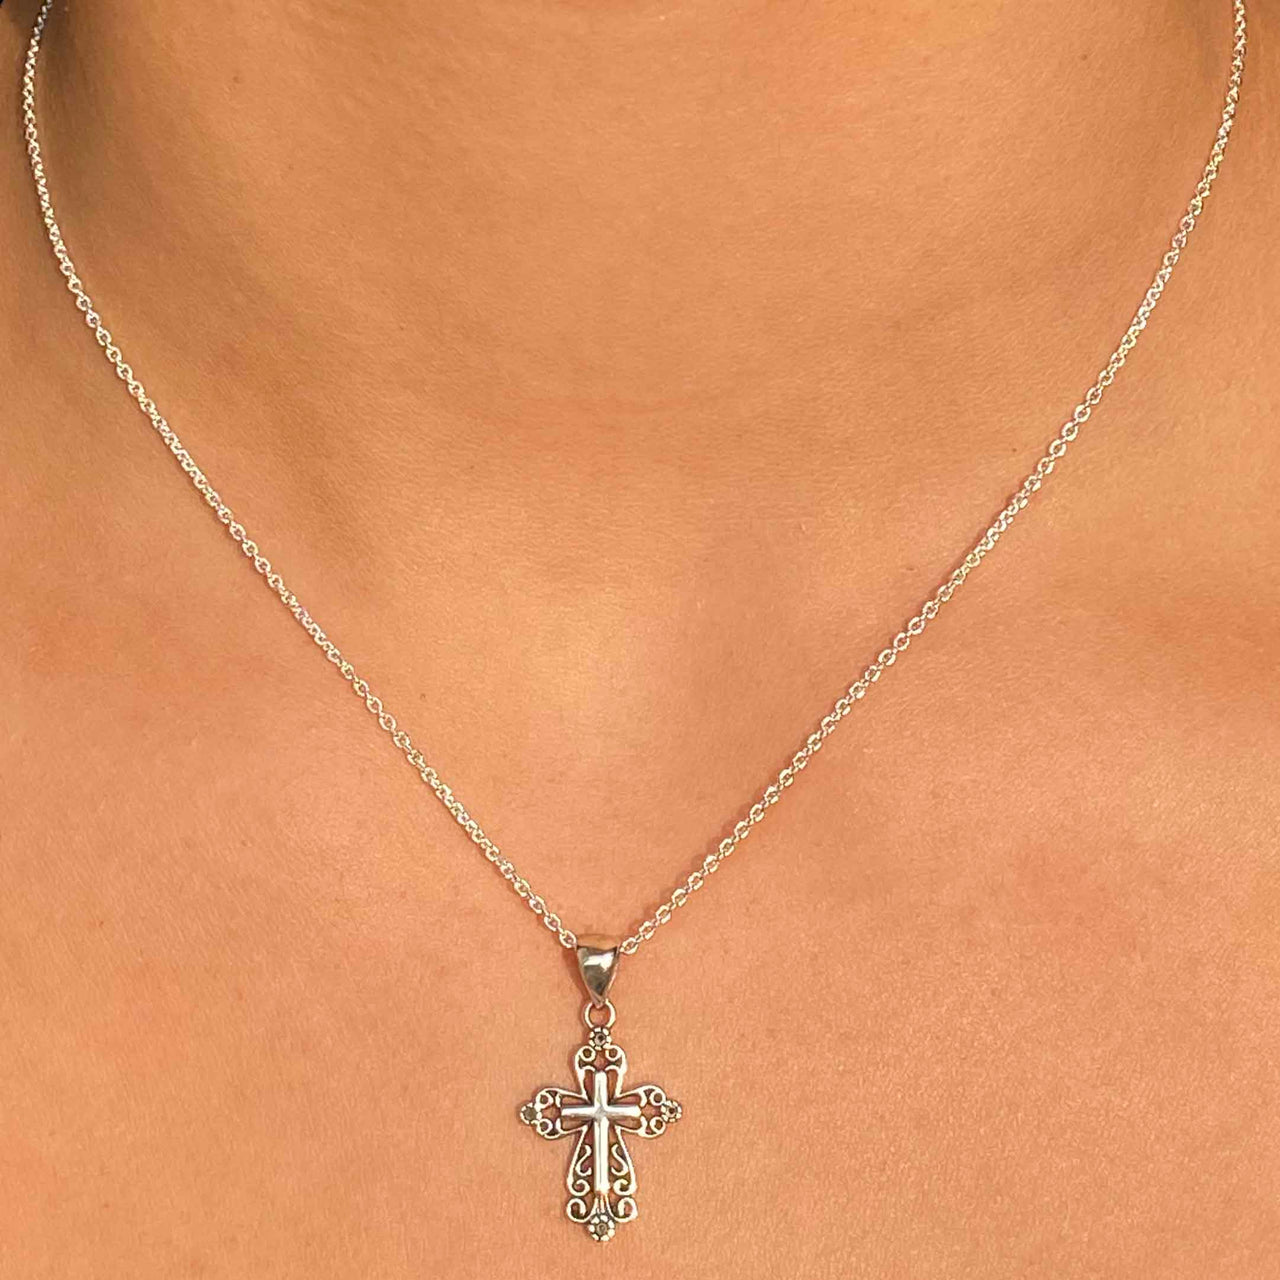 Vintage Cross Necklace Sterling Silver Jewelry